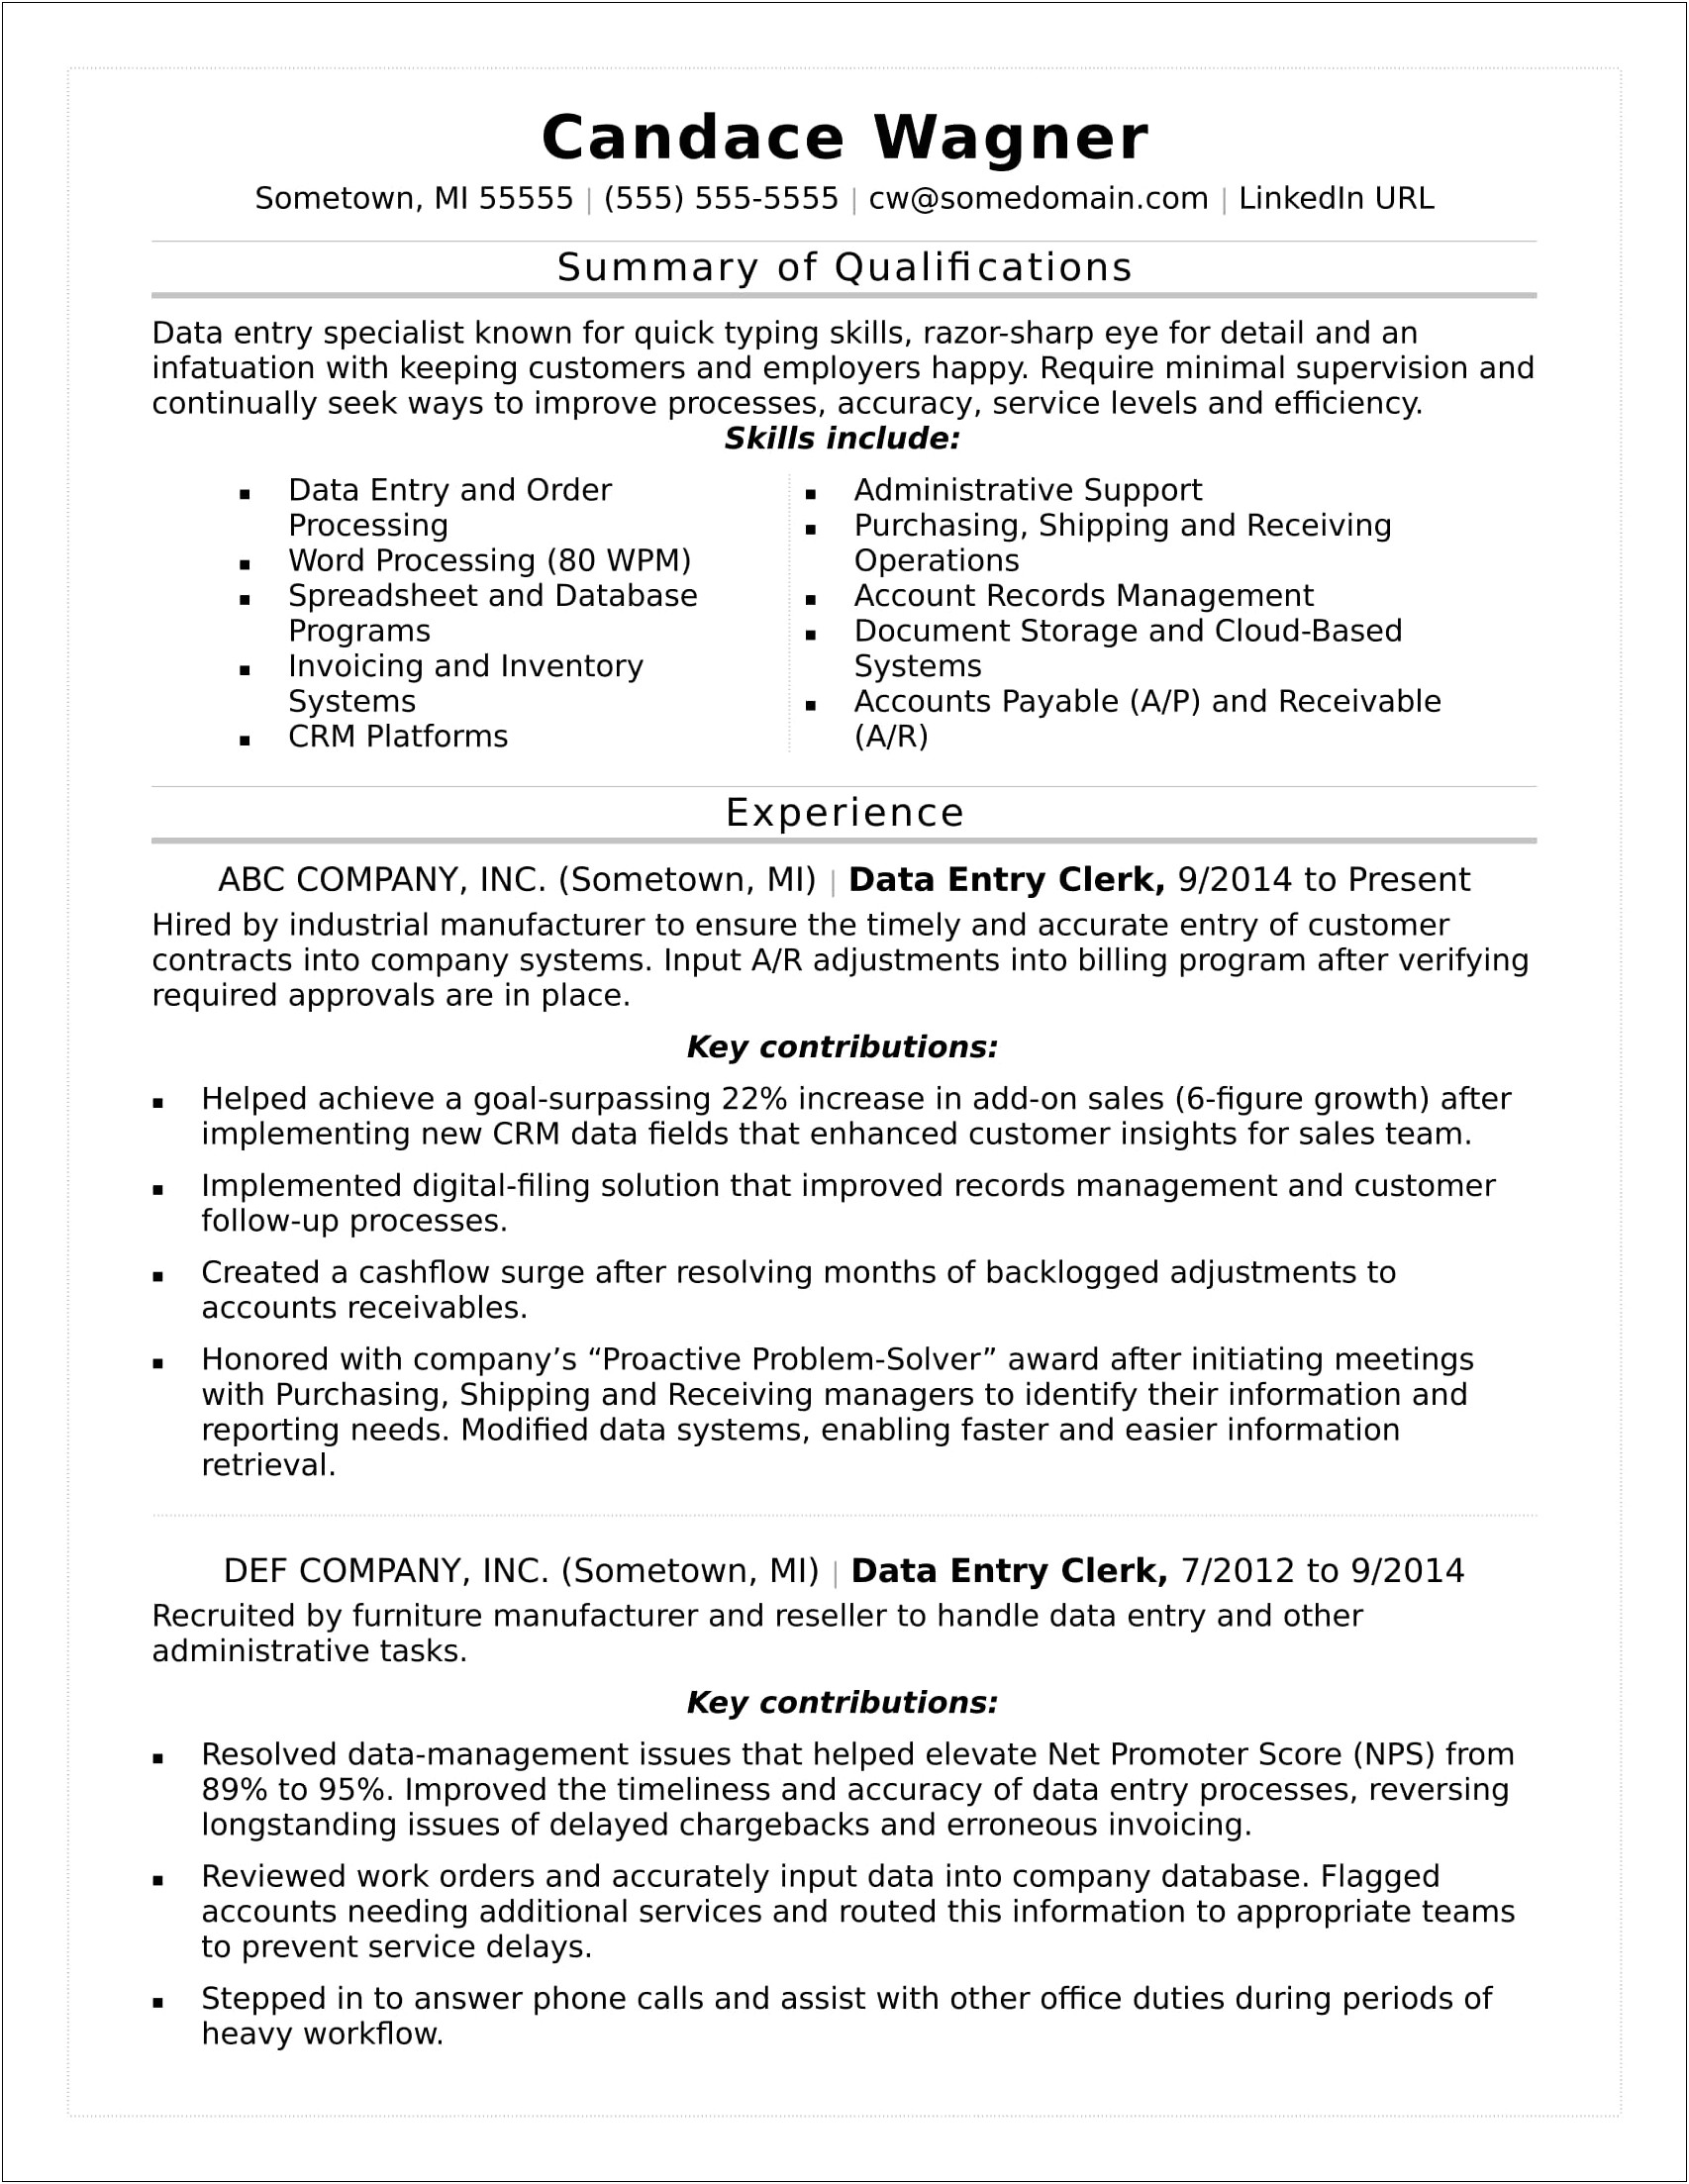 Samples Of Resume Summary Of Qualifications